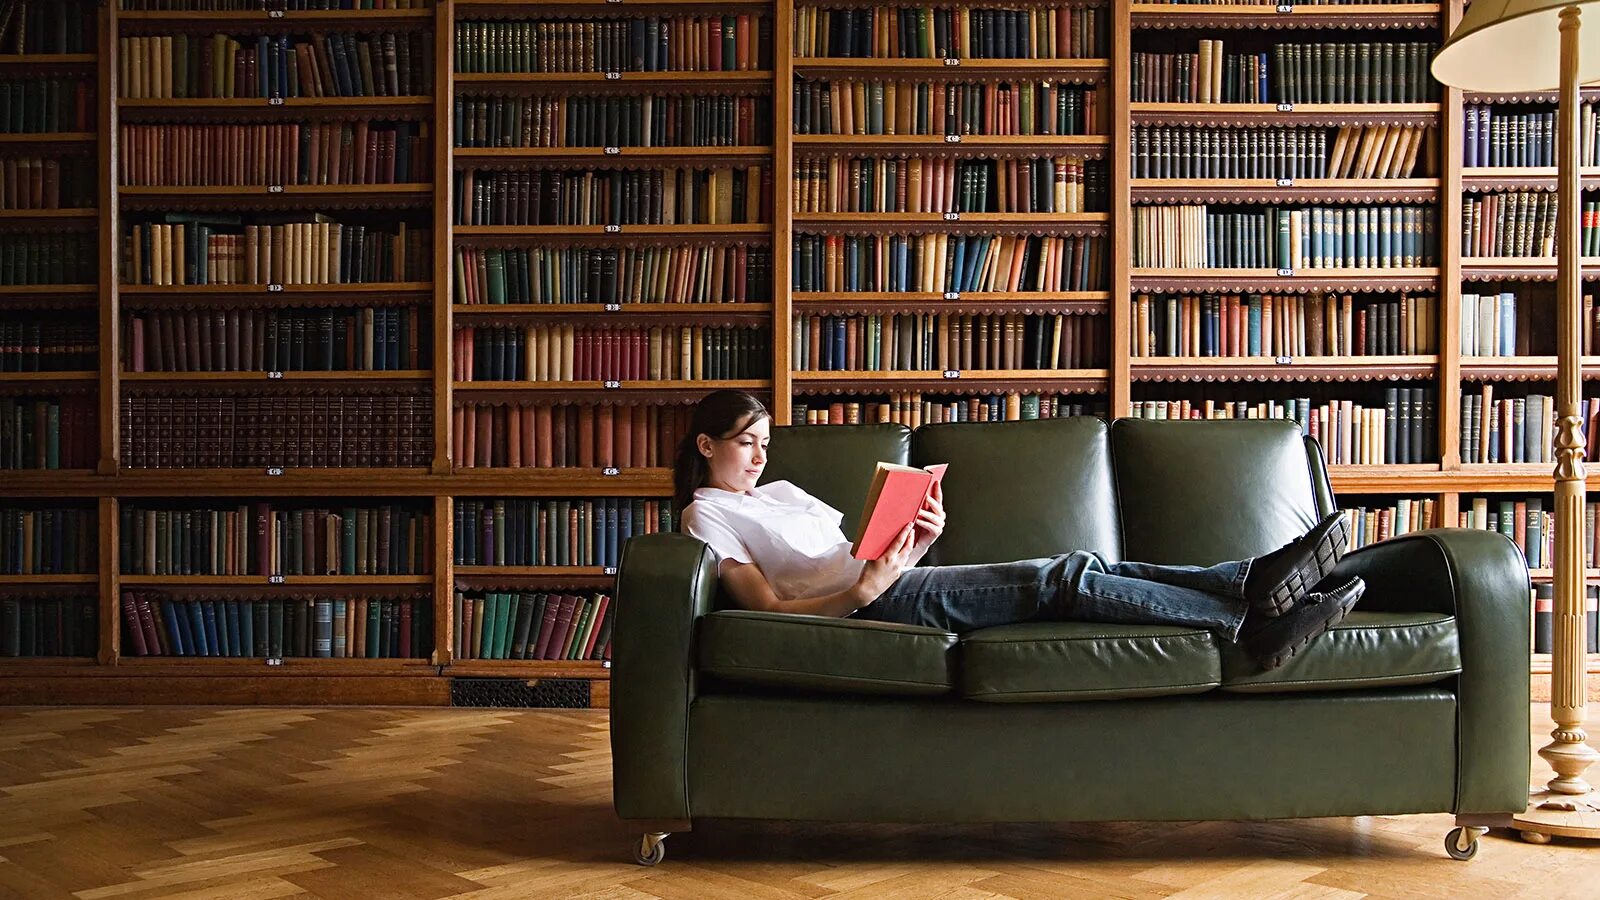 Top 10 books to read. Be in good books. 10 Книги, которые изменят Вашу жизнь. Old book Sofa. She books at home